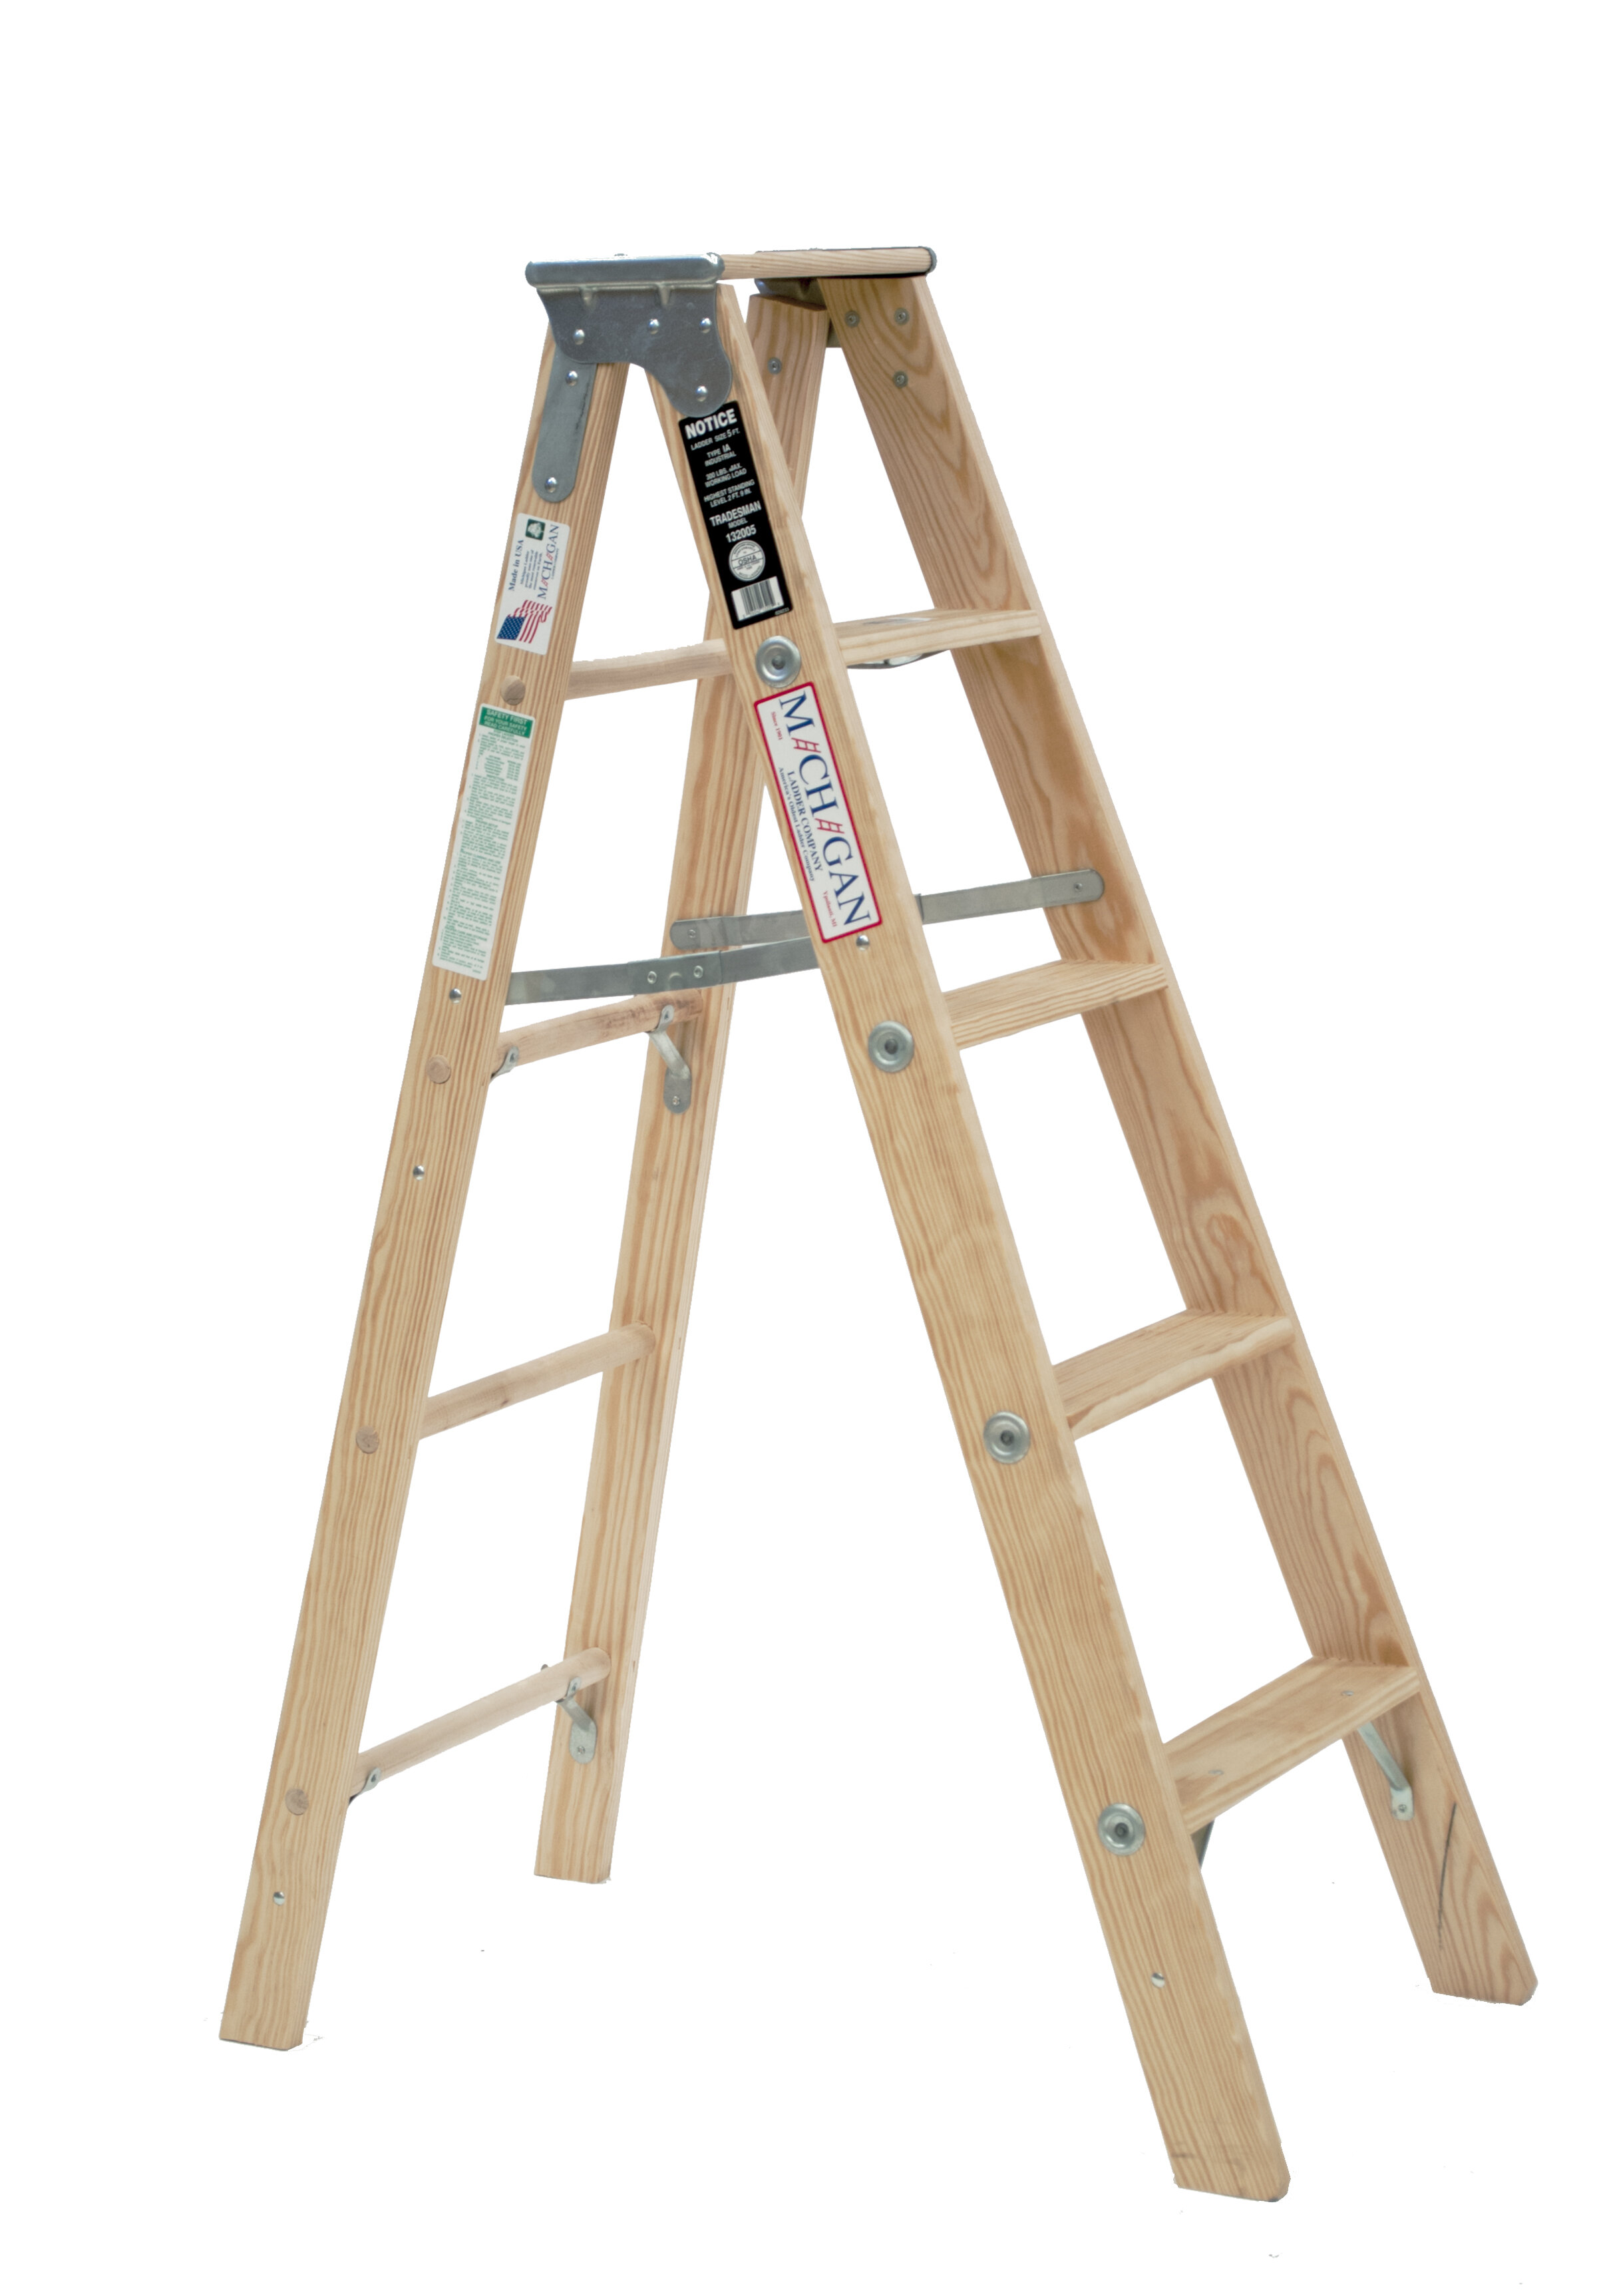 Wfx Utility 5 Ft Wood Step Ladder With 300 Lb Load Capacity Reviews Wayfair